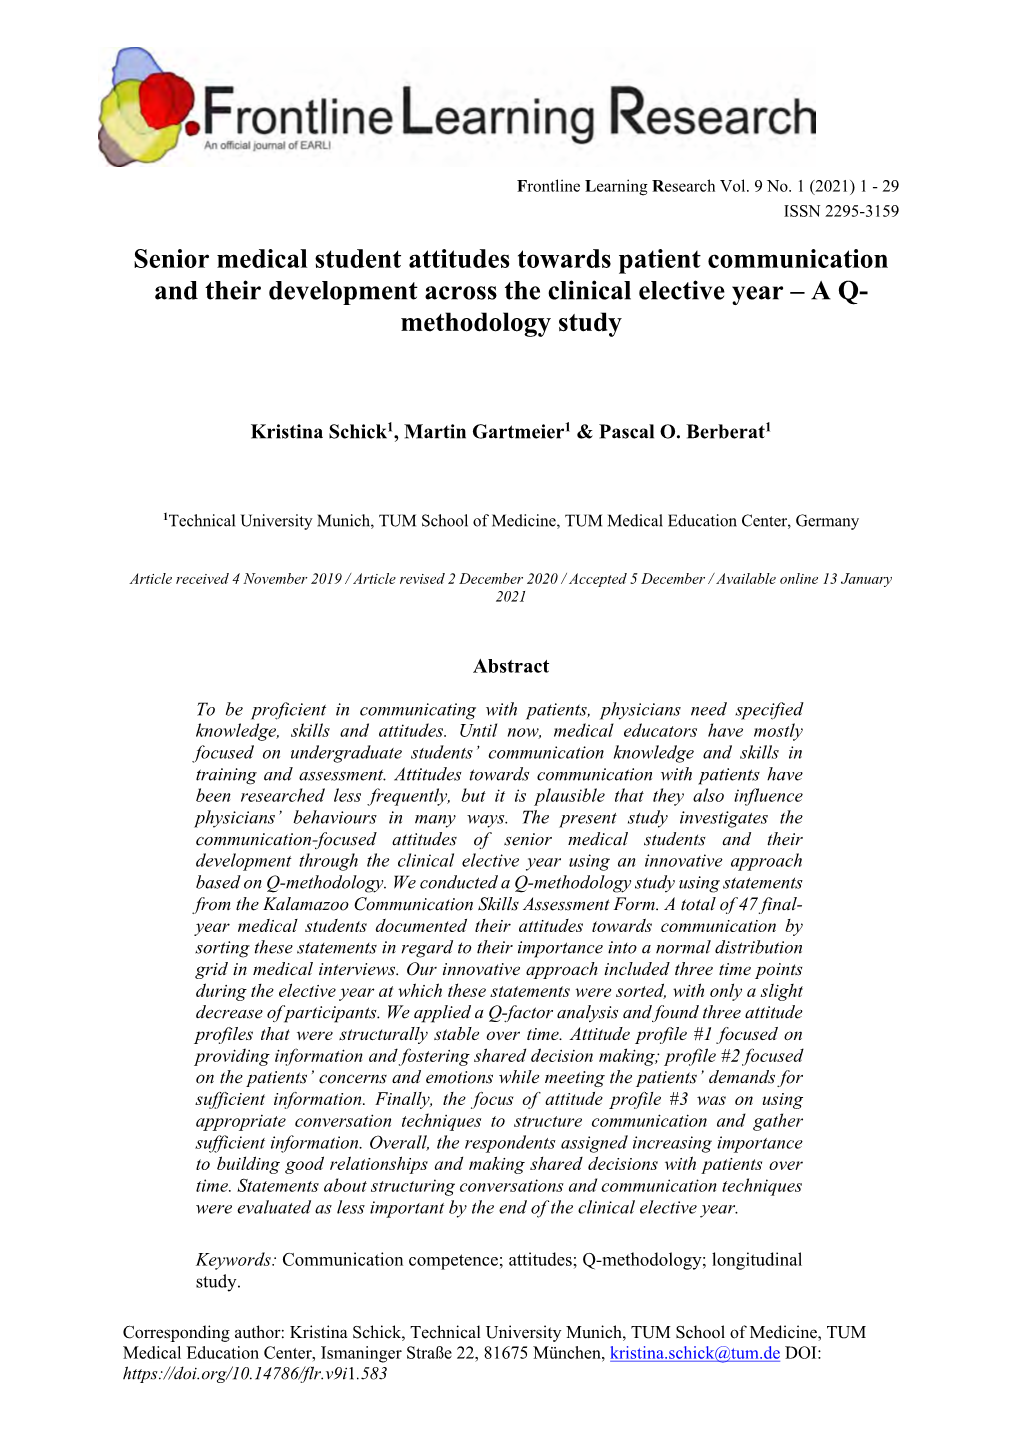 Senior Medical Student Attitudes Towards Patient Communication and Their Development Across the Clinical Elective Year – a Q- Methodology Study